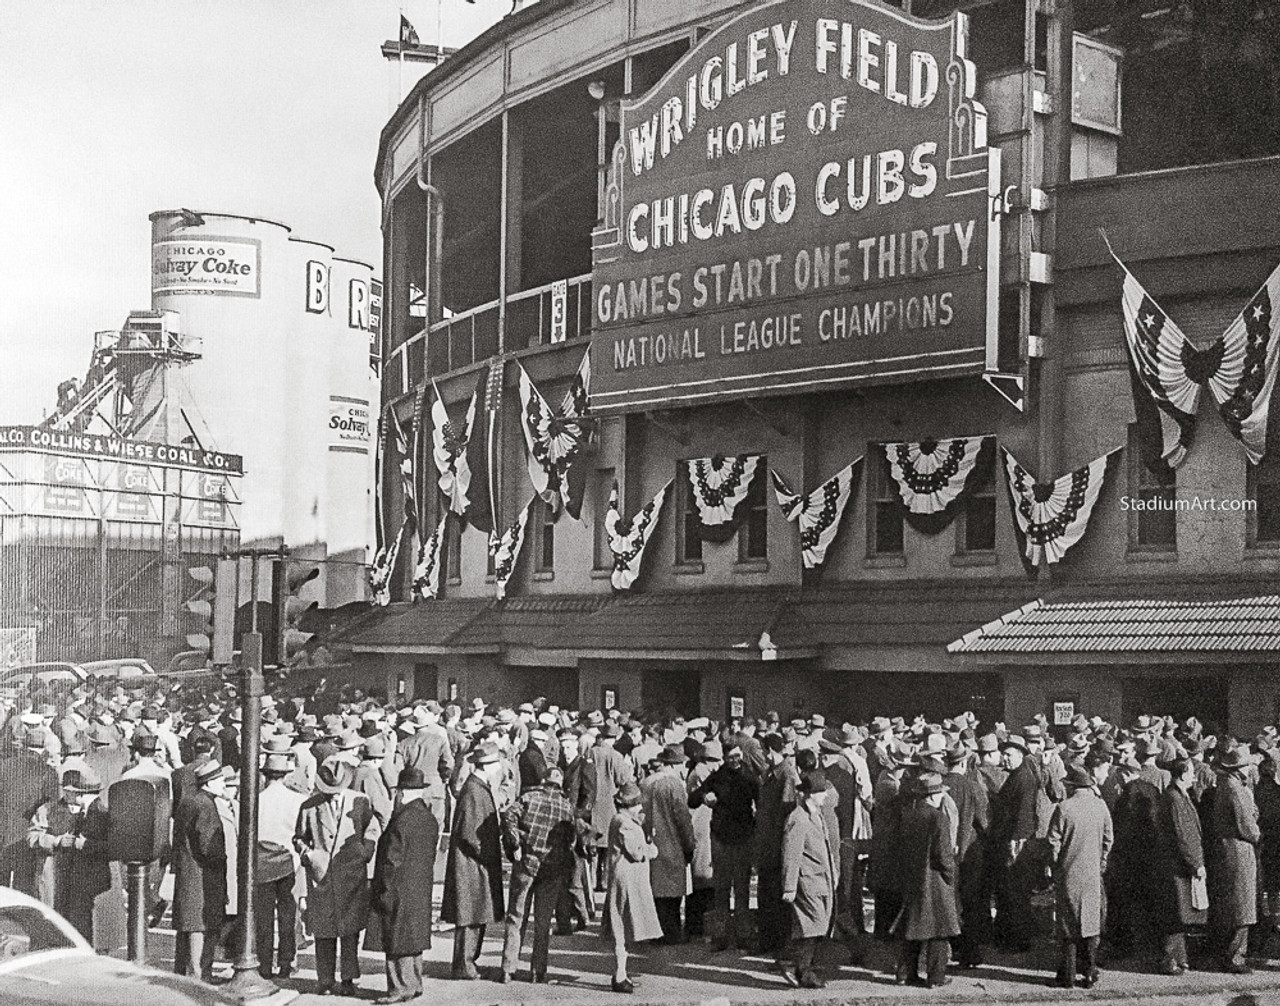 chicago cubs baseball store